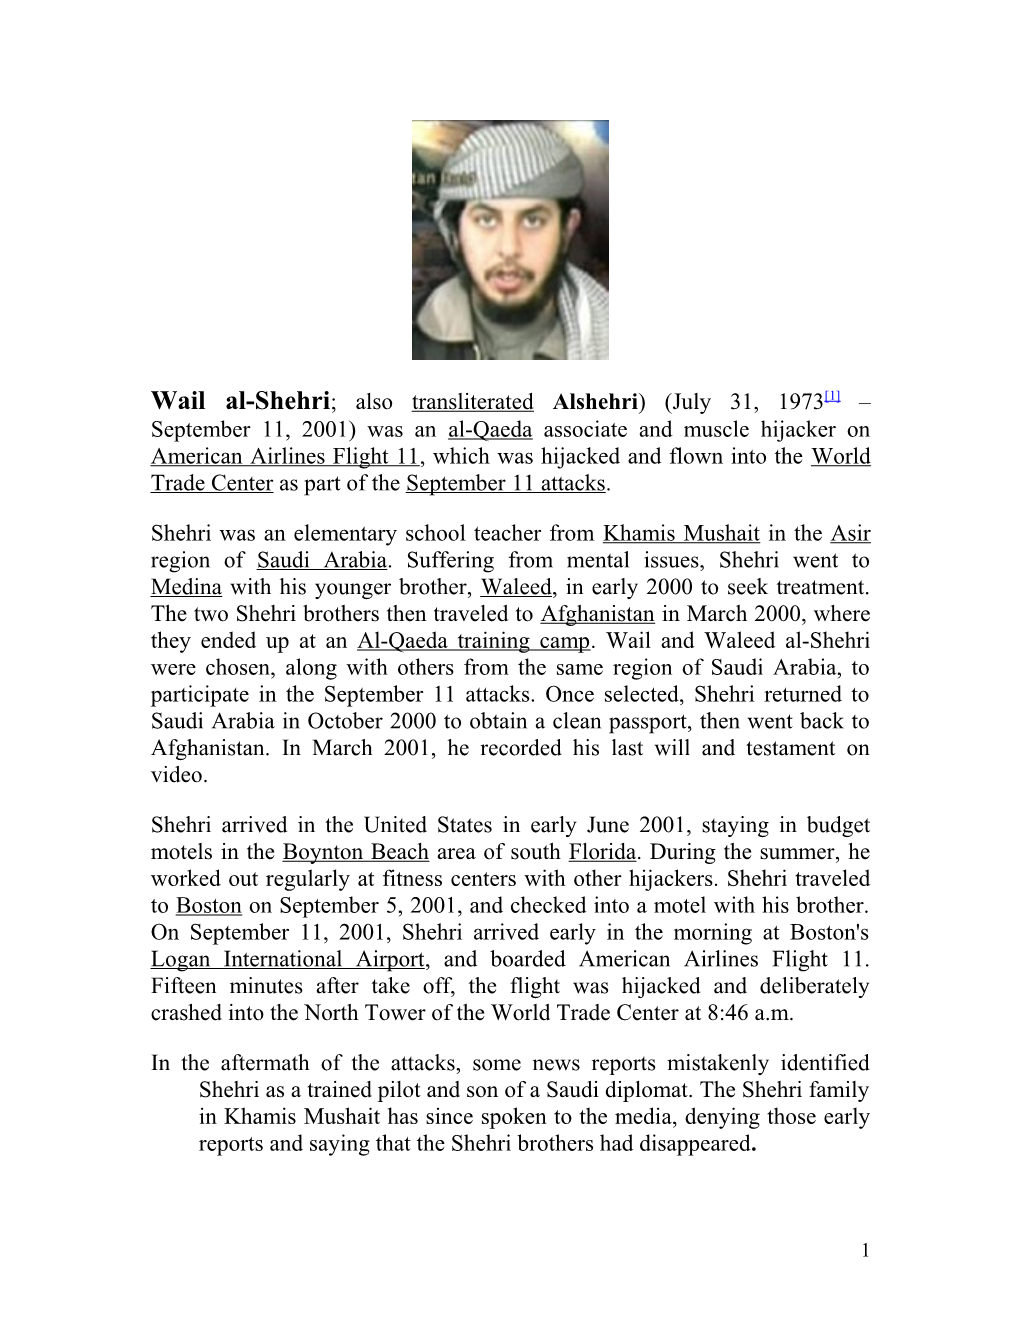 In the Aftermath of the Attacks, Some News Reports Mistakenly Identified Shehri As a Trained